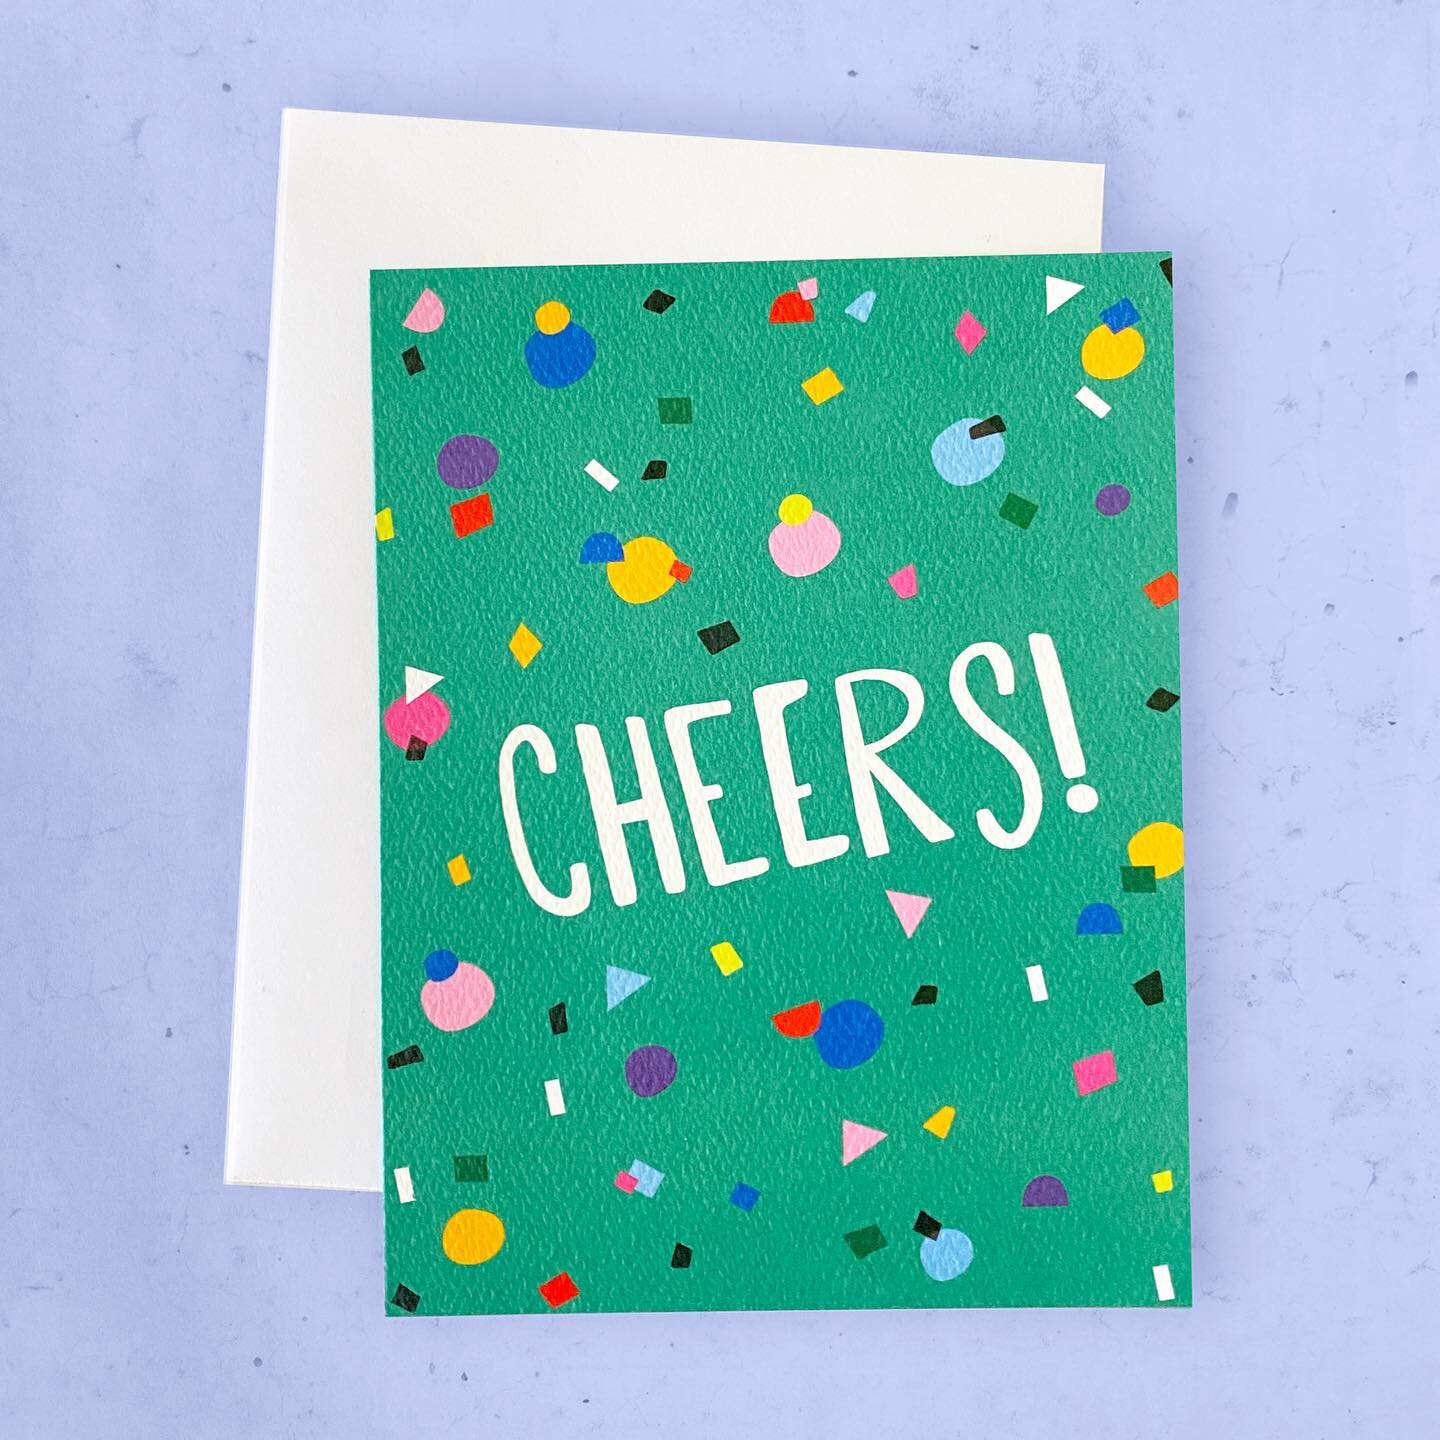 Cheers to a long holiday weekend! And to this card sample with my artwork, licensed to @ginabdesigns ☺️

There is a ton of fresh new artwork in my private portfolio available for licensing. Email hello@nadiahassan.com to request access.

#licensingar